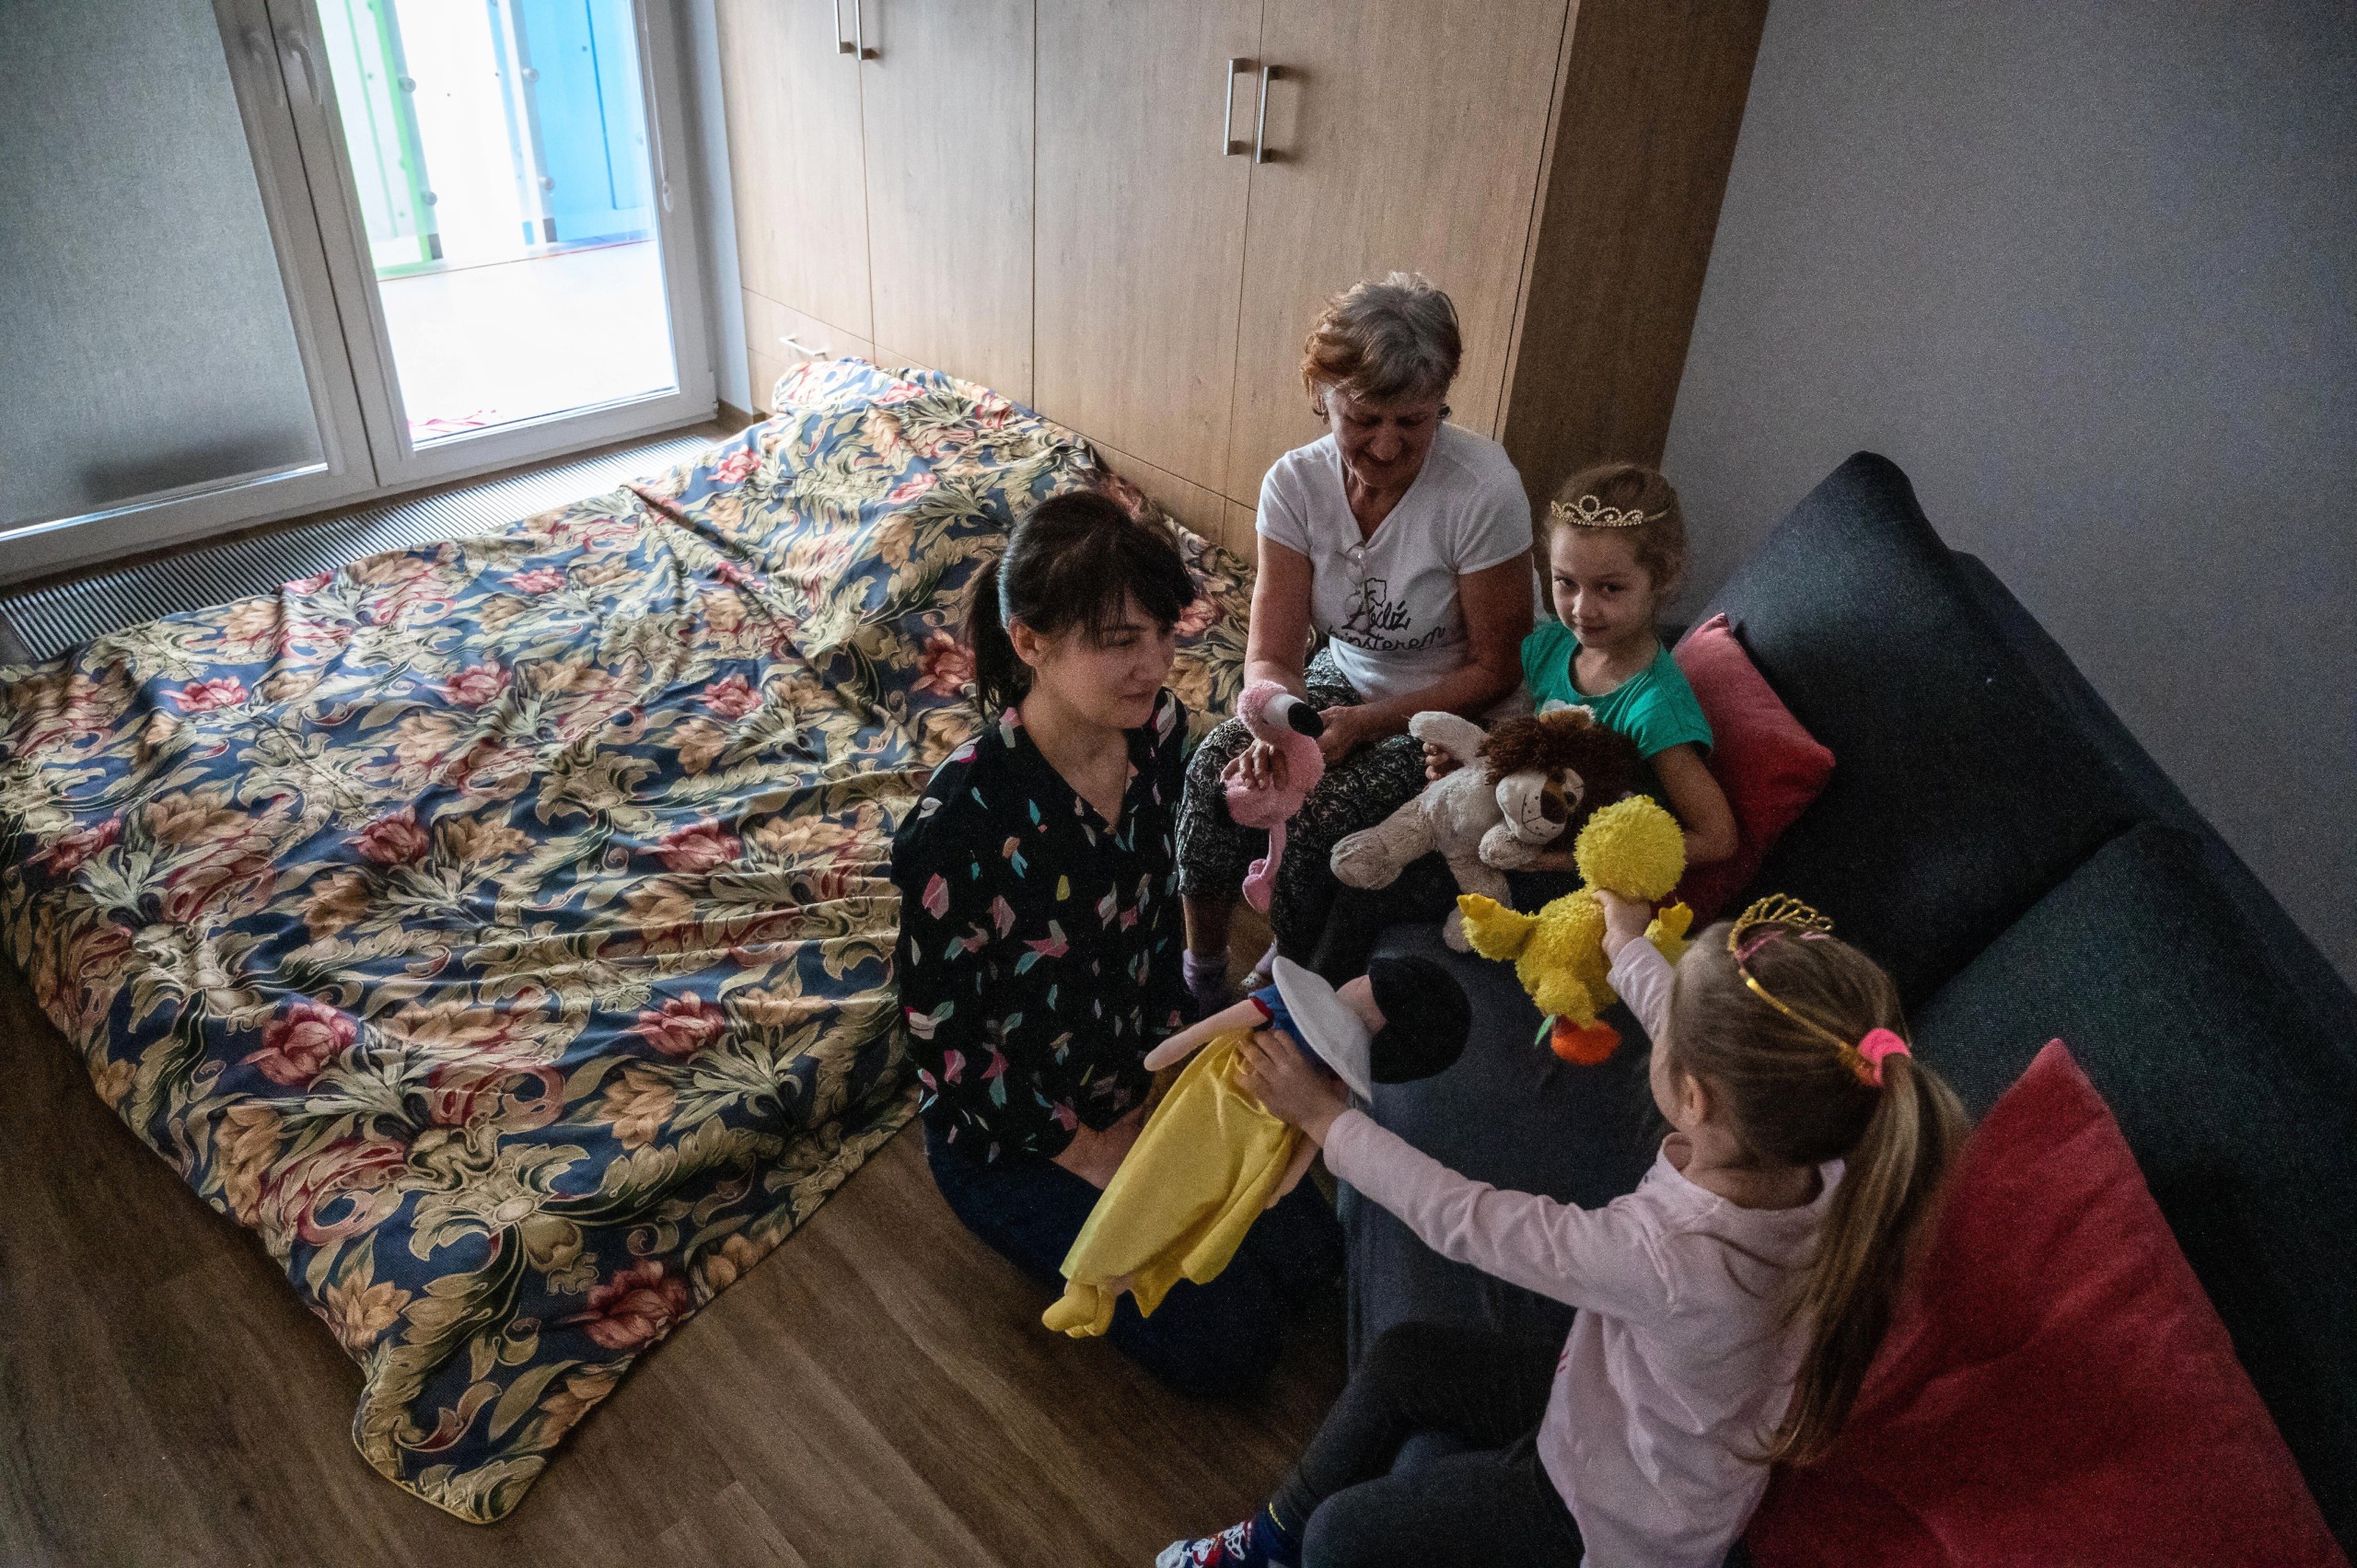 epa09870678 Ukrainian refugees play in a new apartment building in Lodz, central Poland, 04 April 2022. The real estate company 'Opus' donated 21 apartments for use to almost 70 women with children from Ukraine.  EPA/Grzegorz Michalowski POLAND OUT